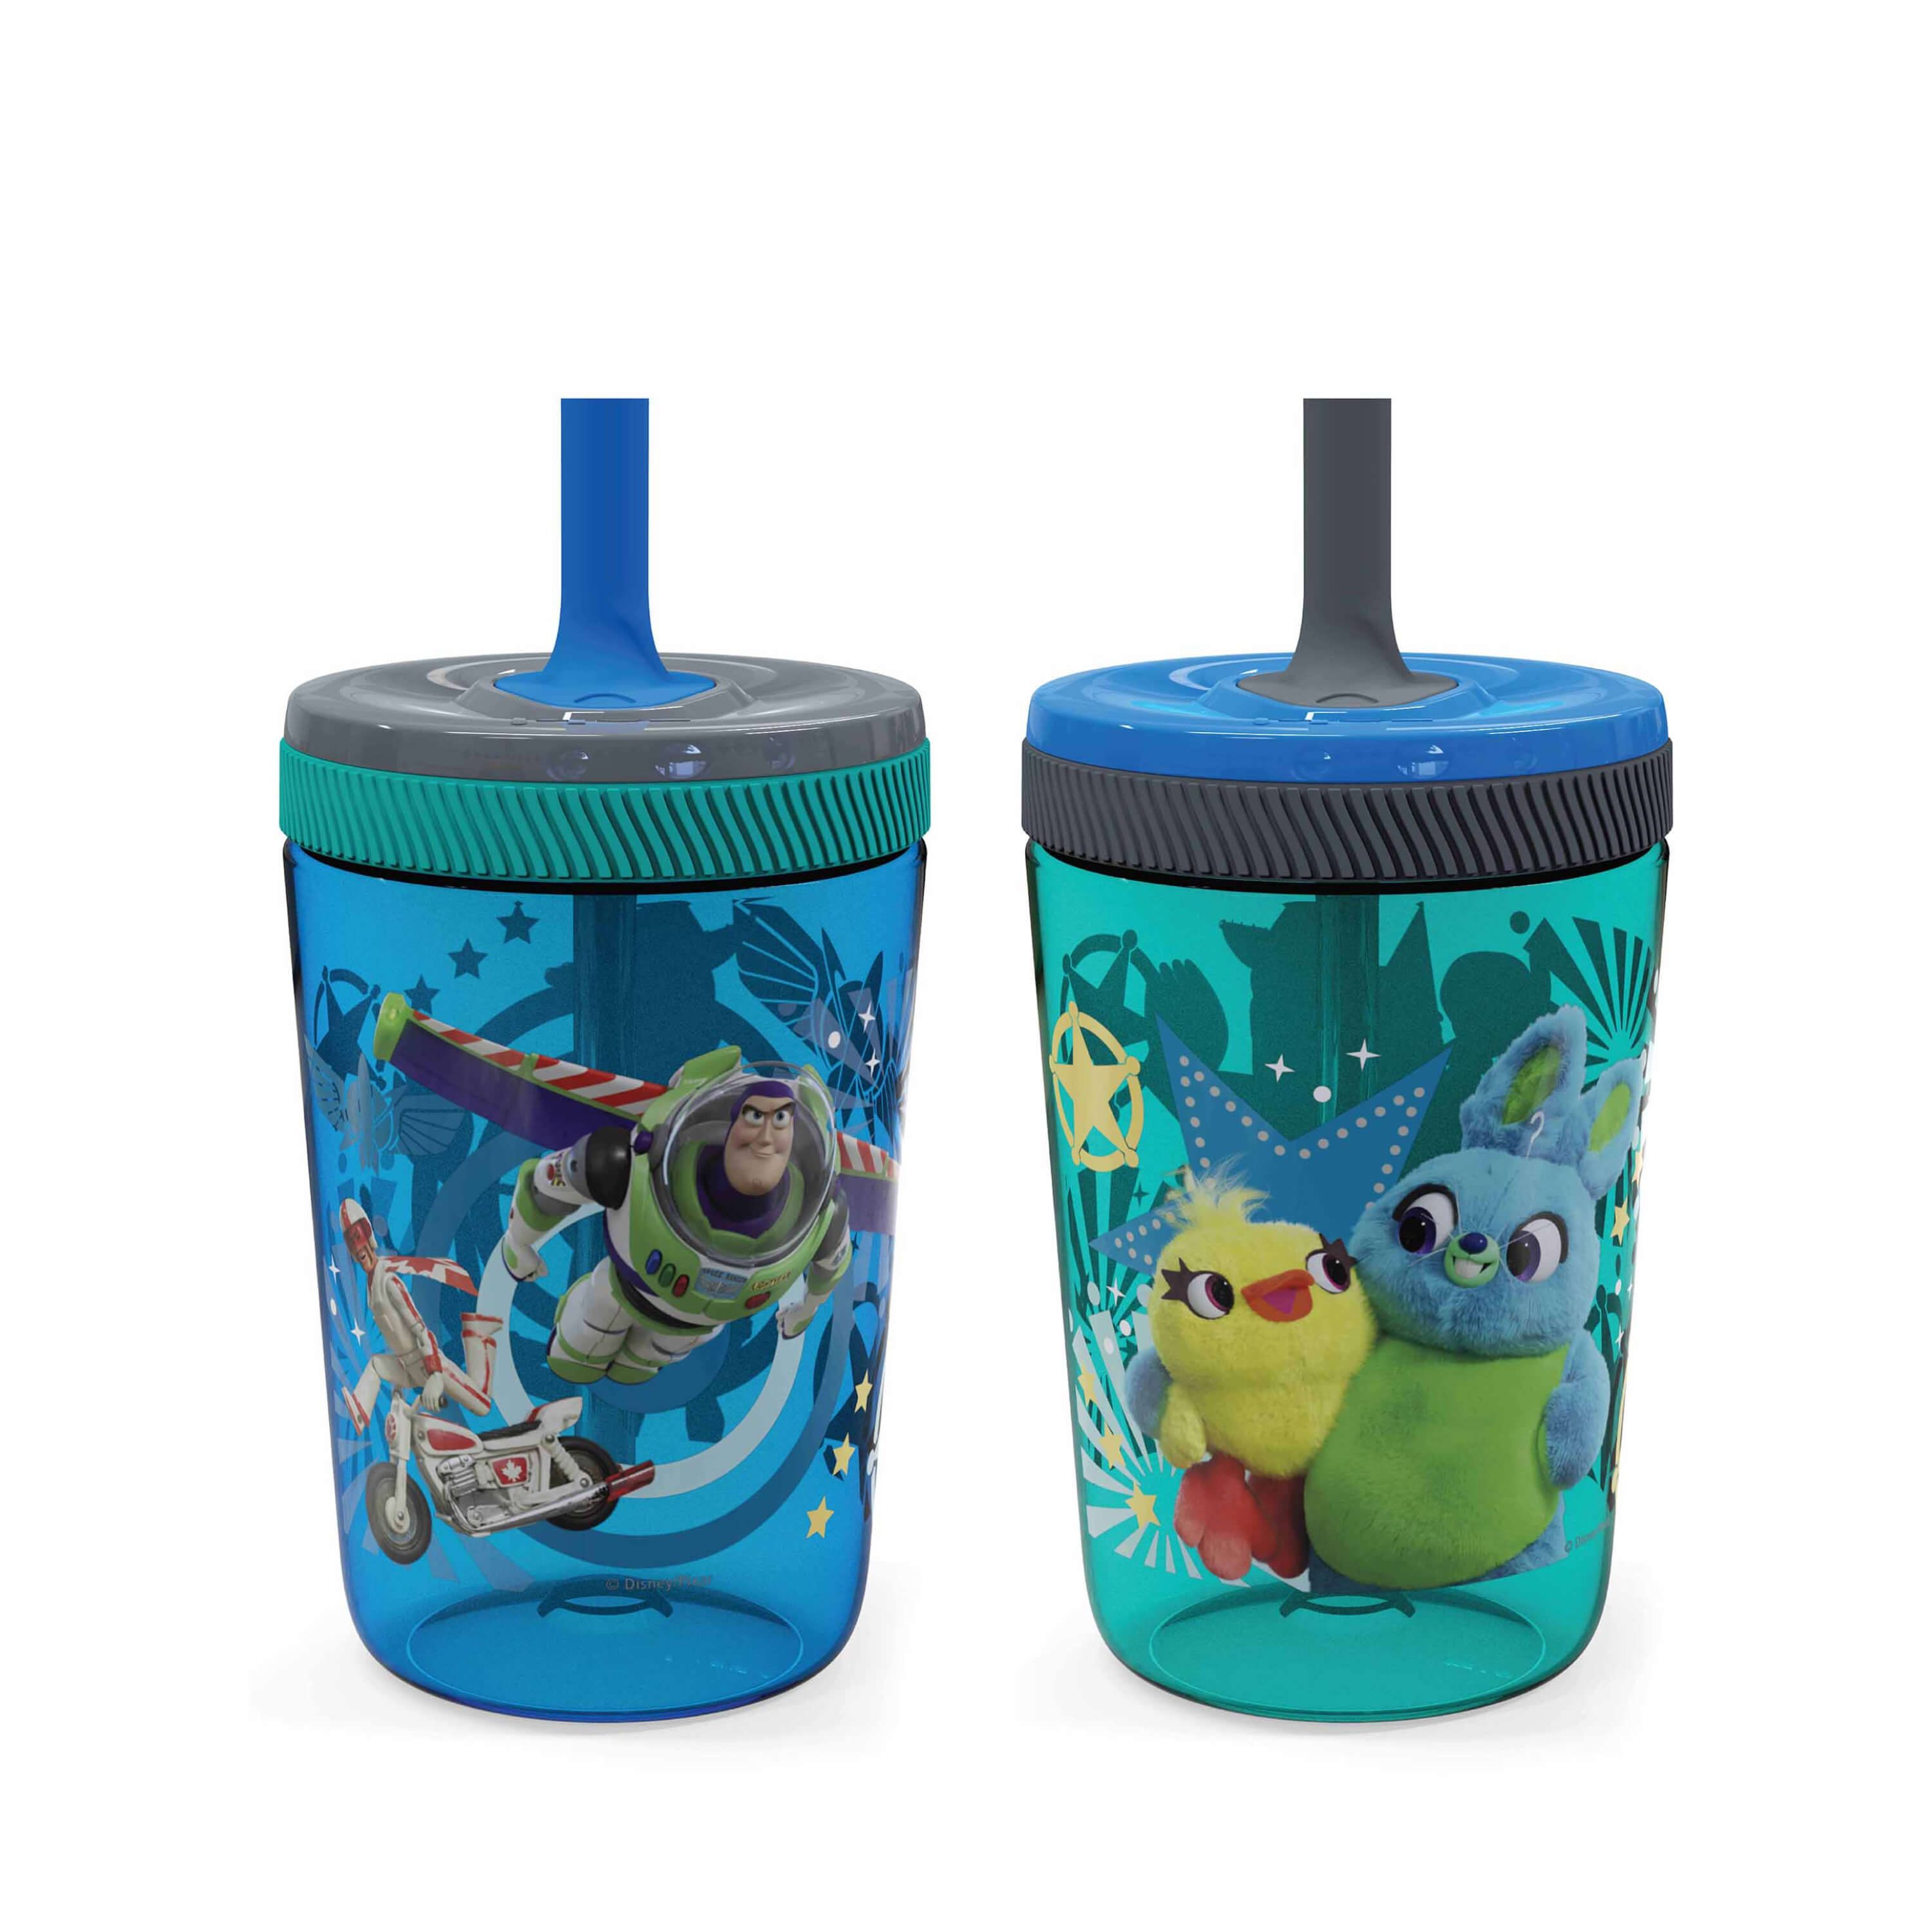 These @zakdesigns kelso tumbler sets are great for toddlers 🥰 Check o